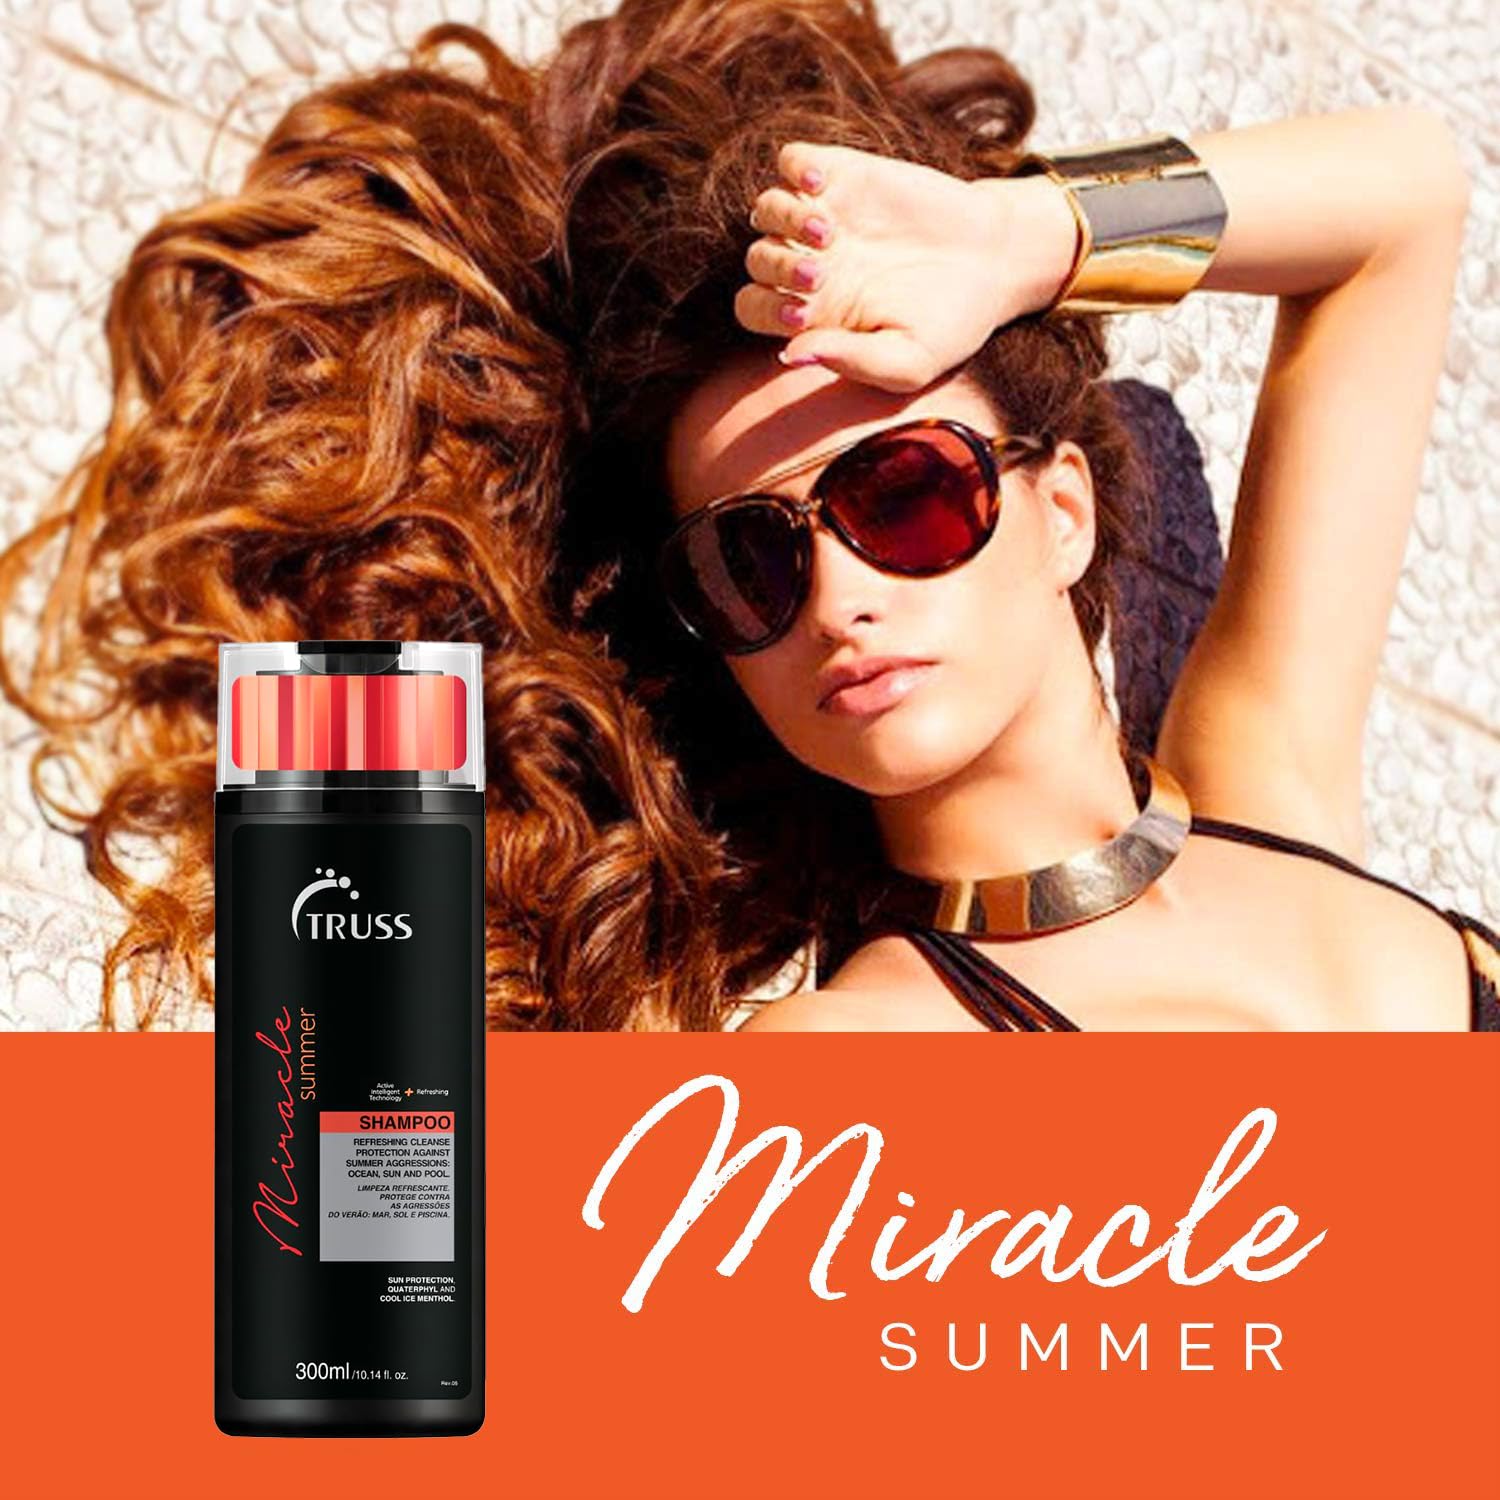 Truss Miracle Summer Shampoo - Protects Hair From Sun, Wind, Salt Damage, Chlorine Damage, Revitalizes, Repairs, Stops Color Fading, Adds Shine - Daily Use for All Hair Types